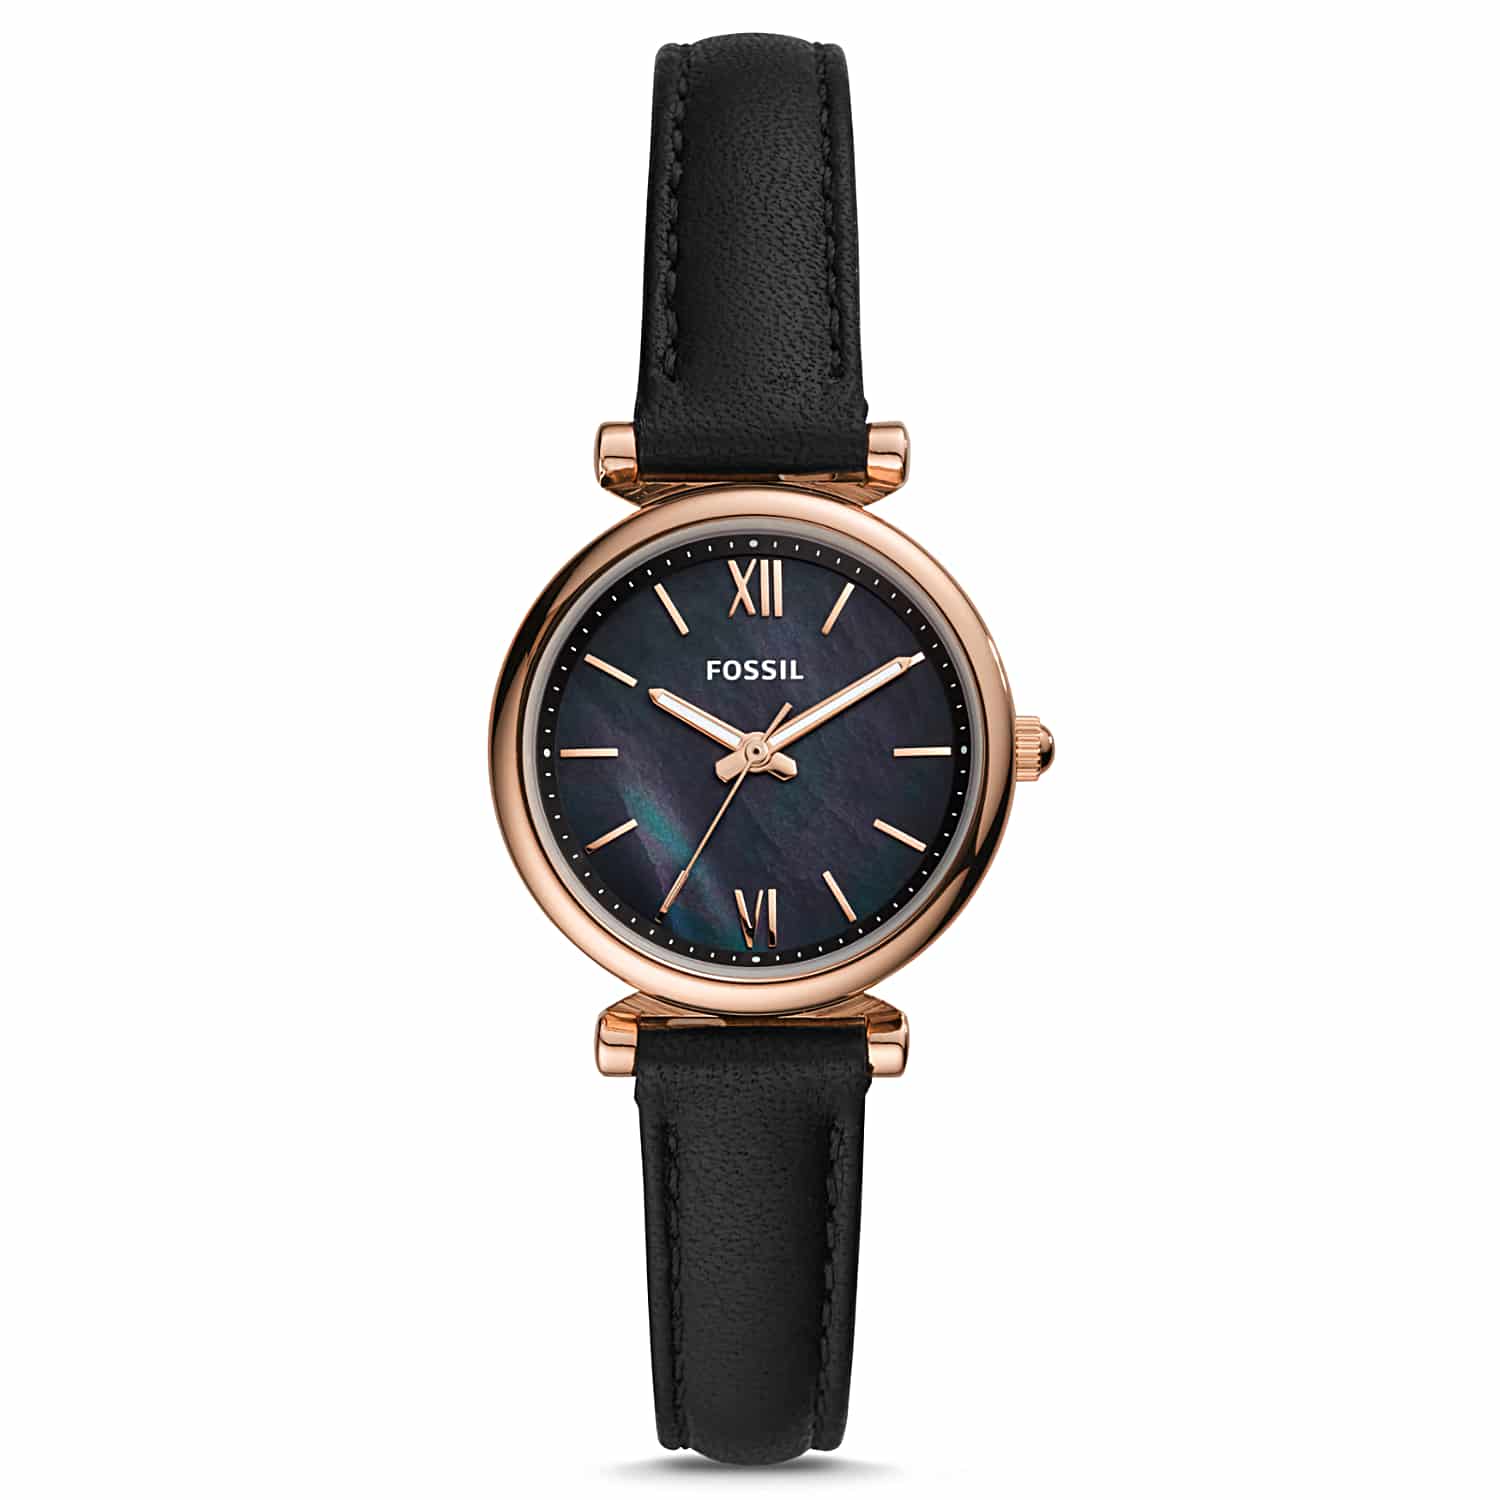 ES4700 Fossil Carlie Mini Black Watch. Absolutely eye-catching, this women’s analogue watch from the House of Fossil which acts as the statement piece if you want to give yourself a refined look. A sturdy in timeless glamour, this Carlie Mini-series watch